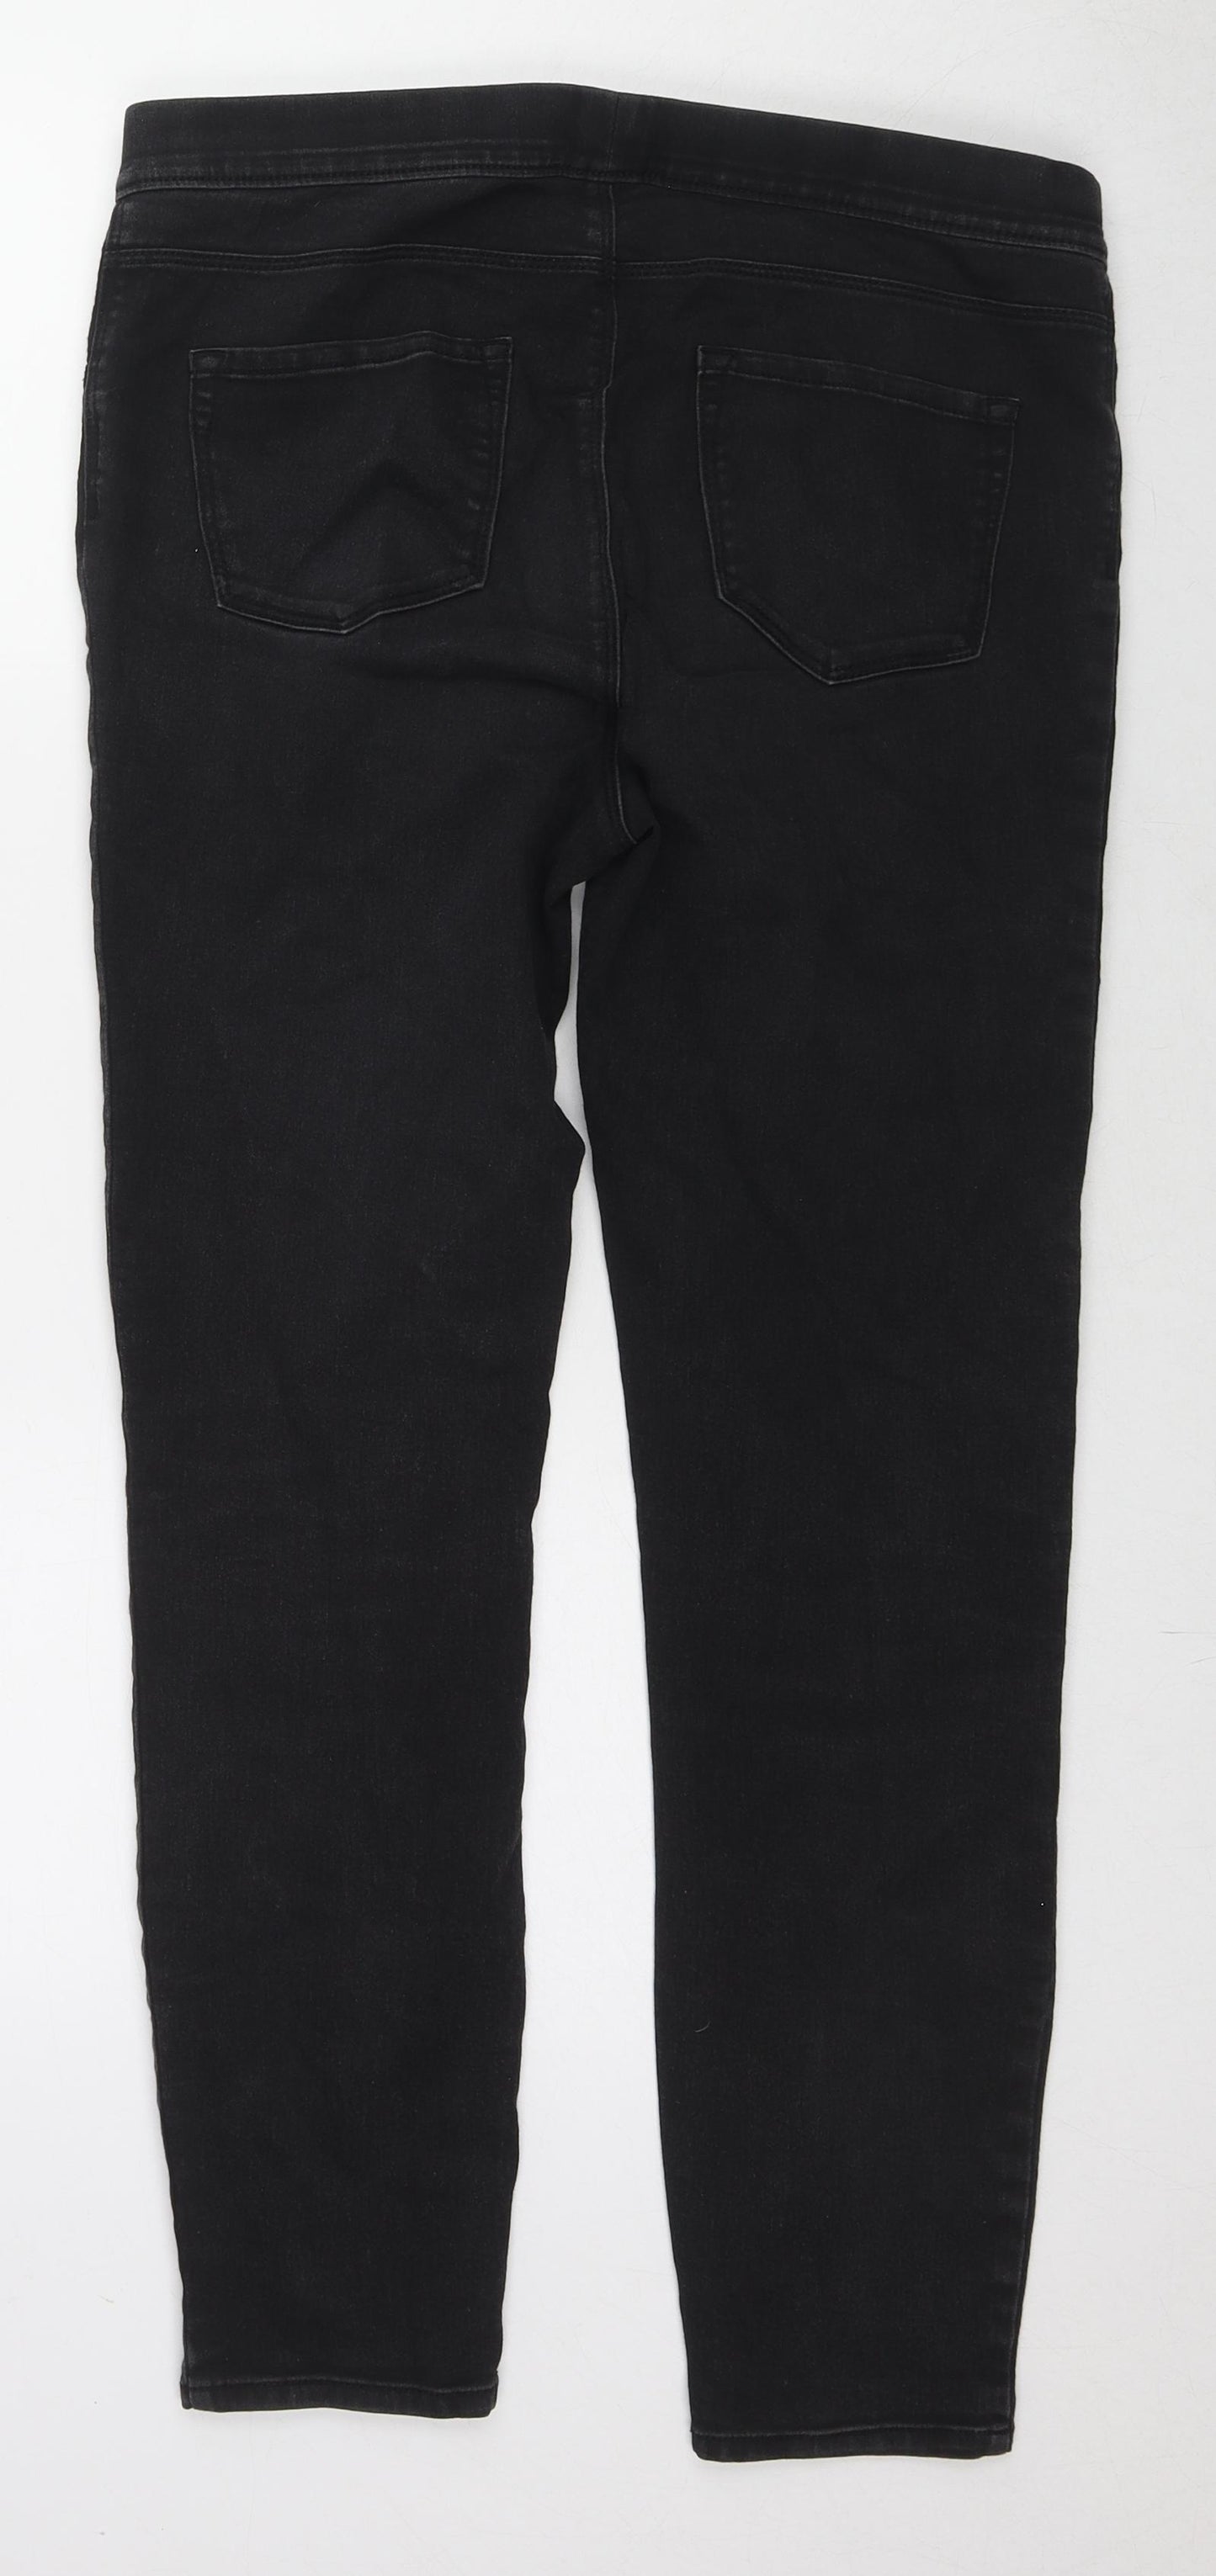 George Womens Black Cotton Skinny Jeans Size 14 L28 in Regular